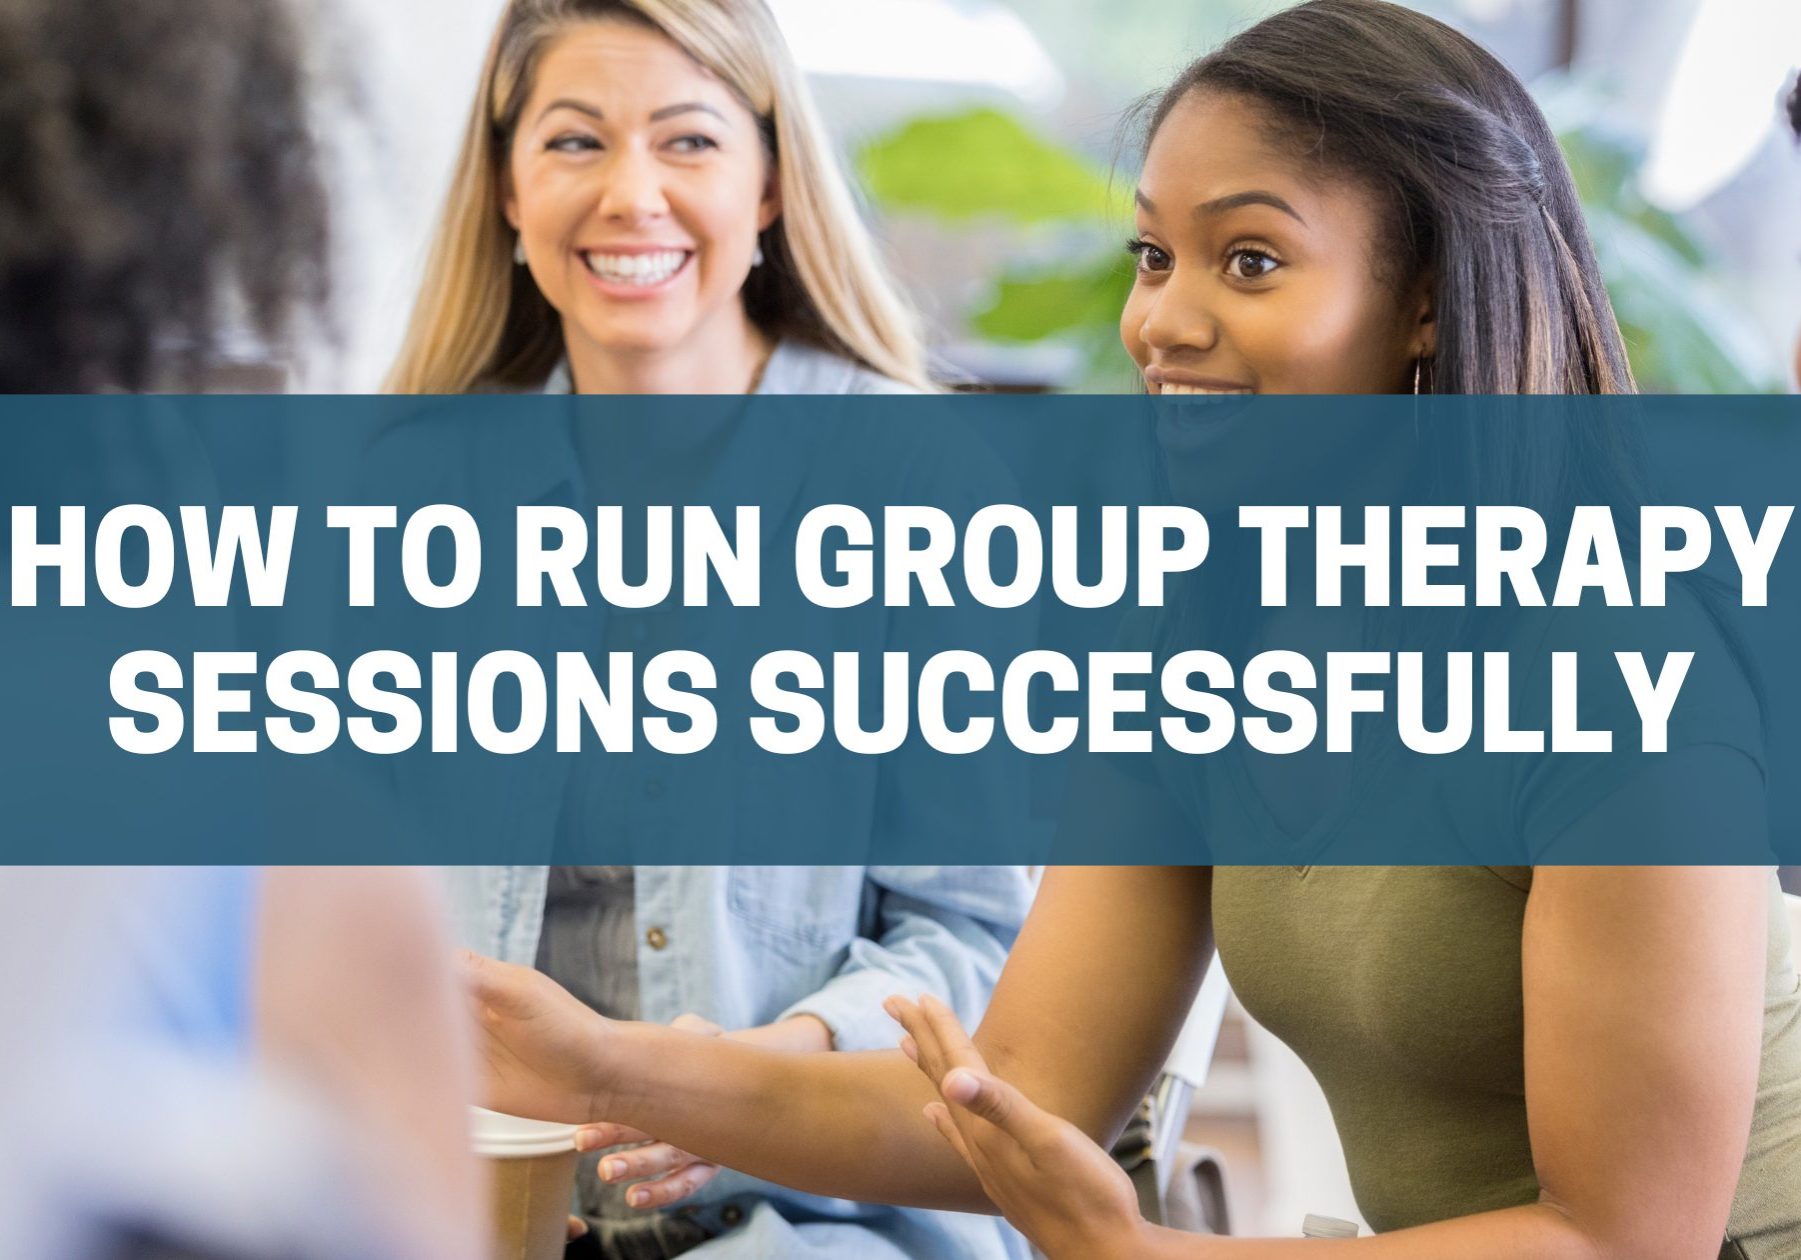 How to Run Group Therapy Sessions Successfully